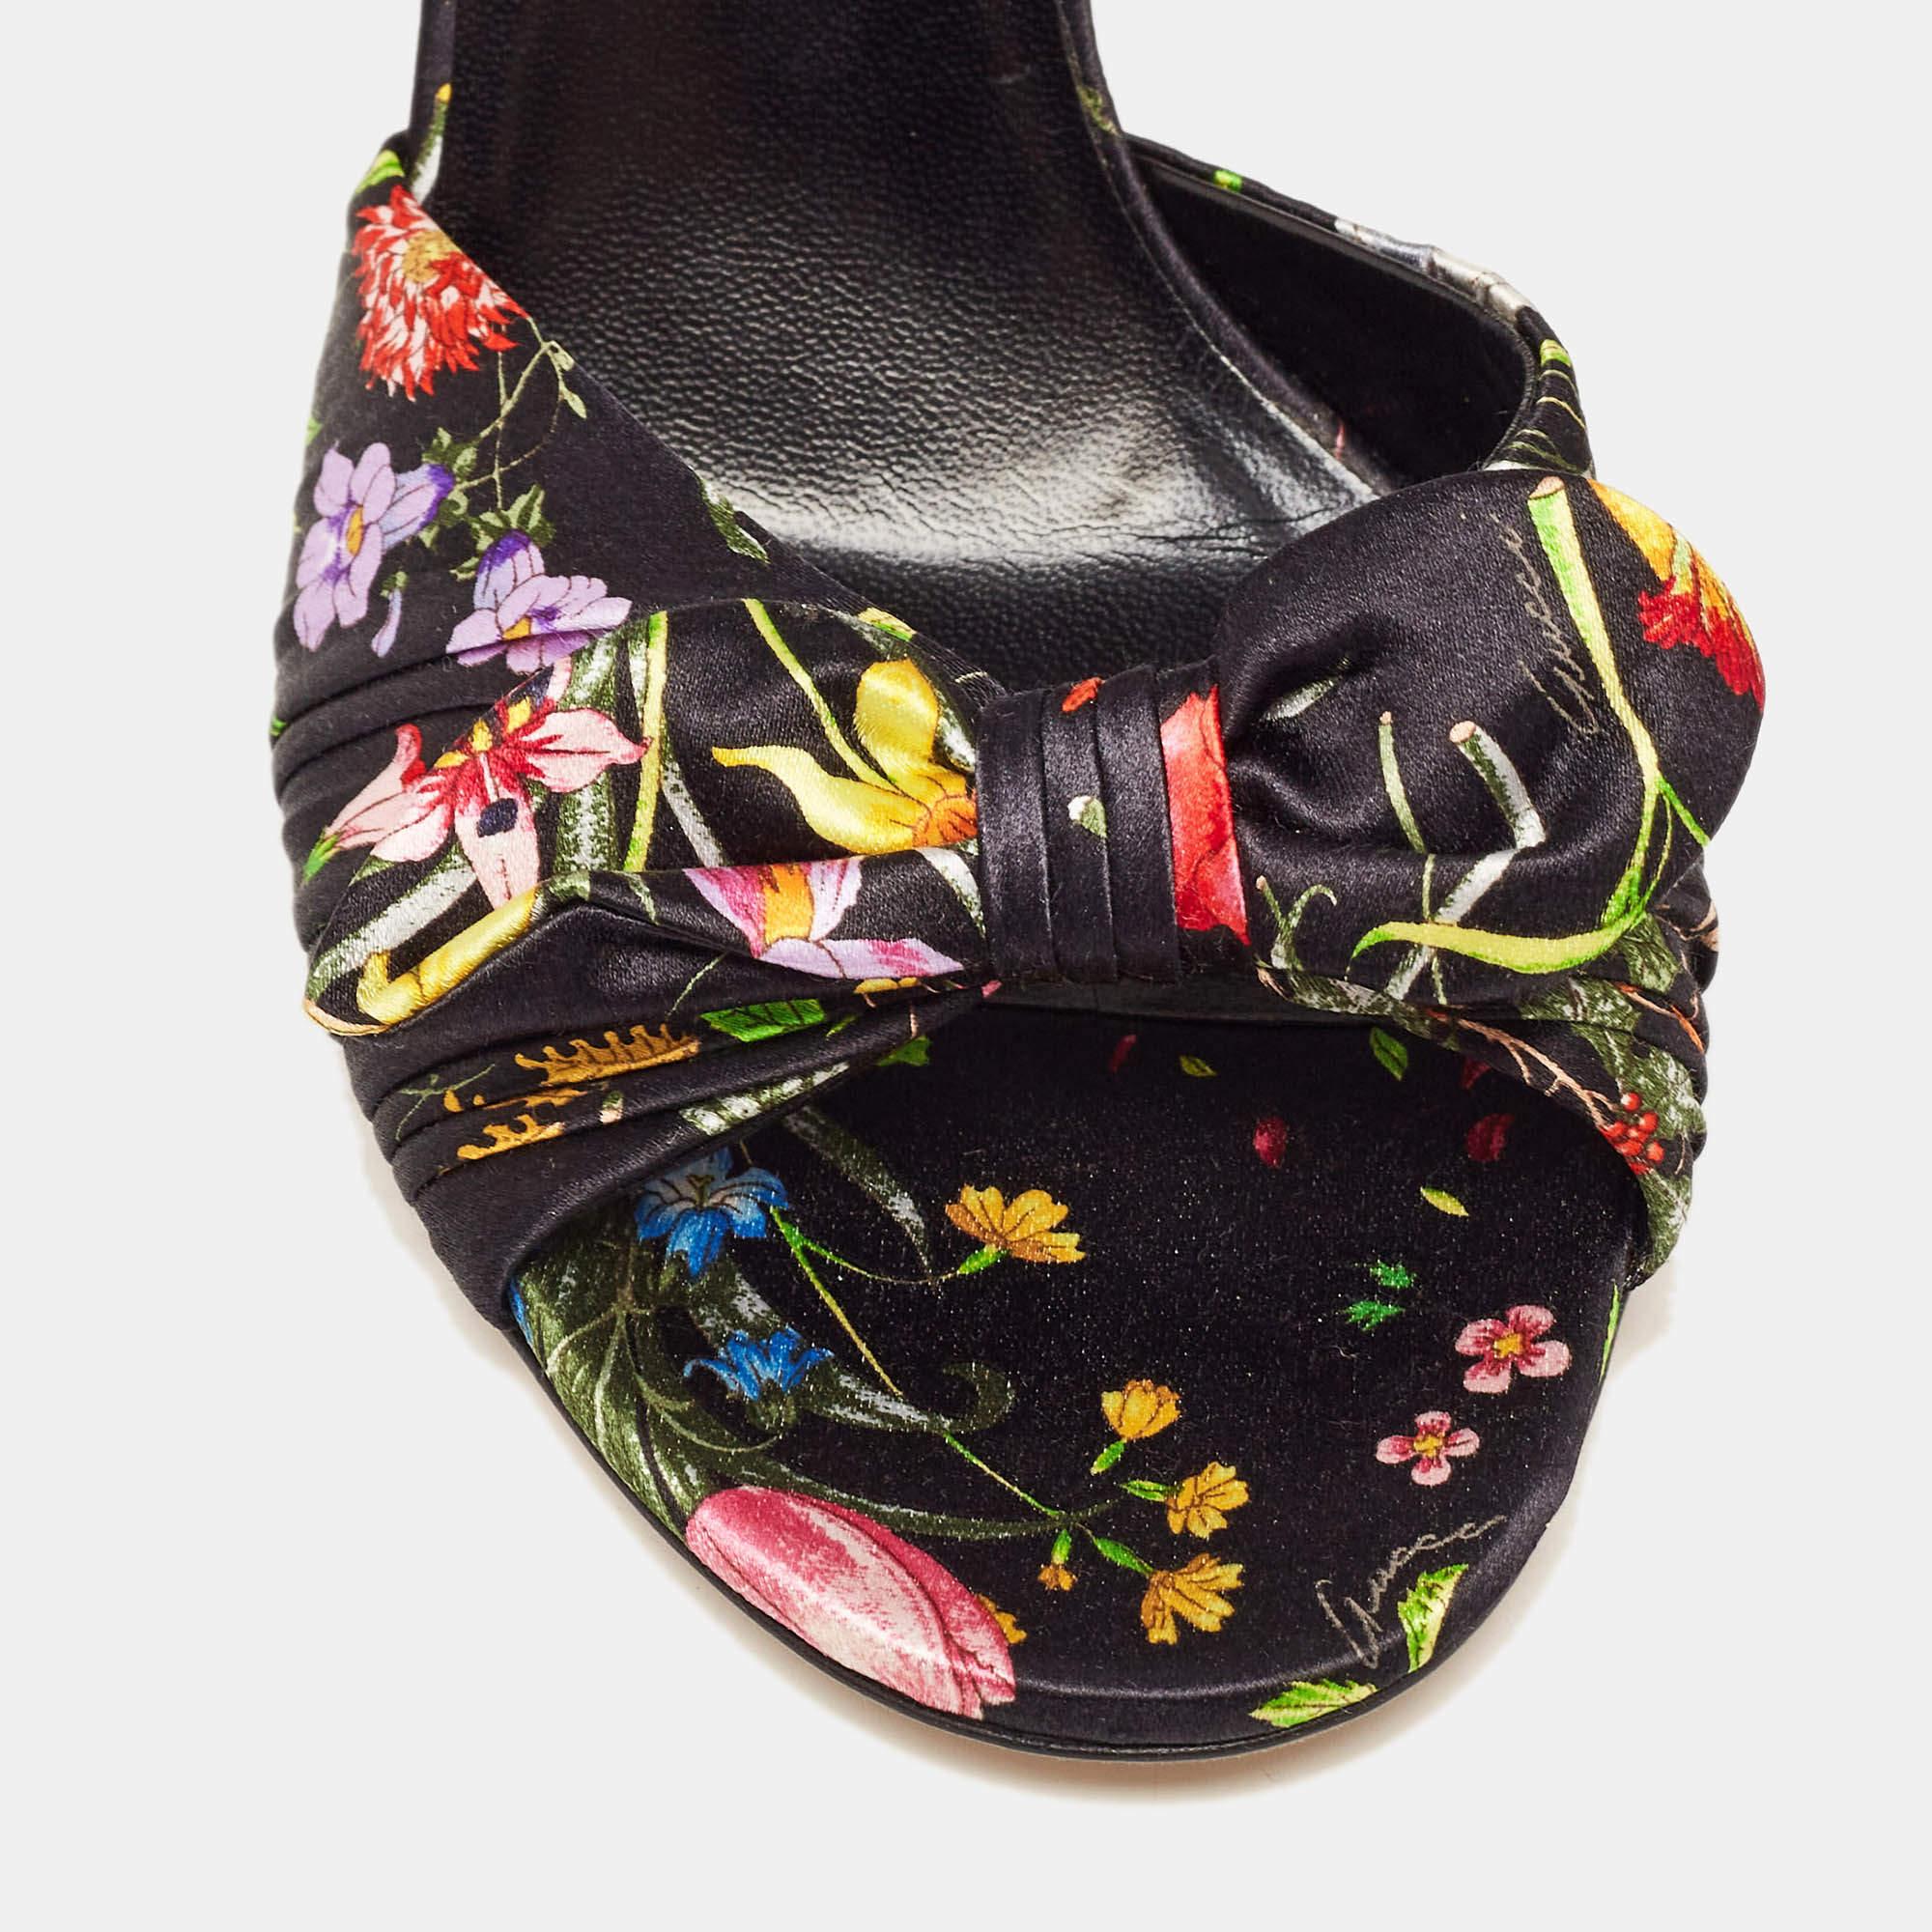 Women's Gucci Black Floral Print Pleated Satin Bow Ankle Strap Sandals Size 39